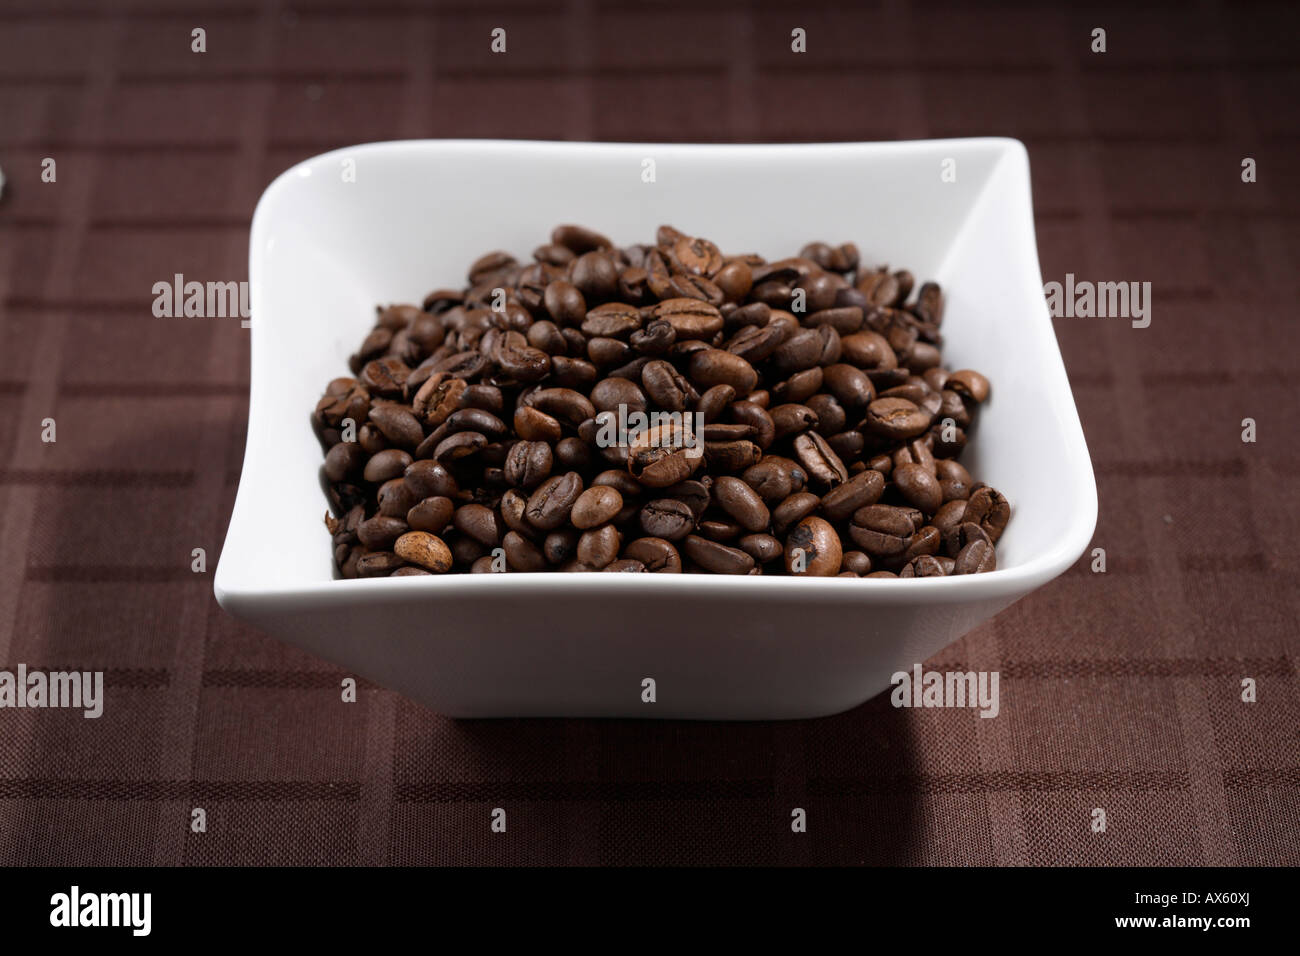 Bowl with coffee beans Stock Photo